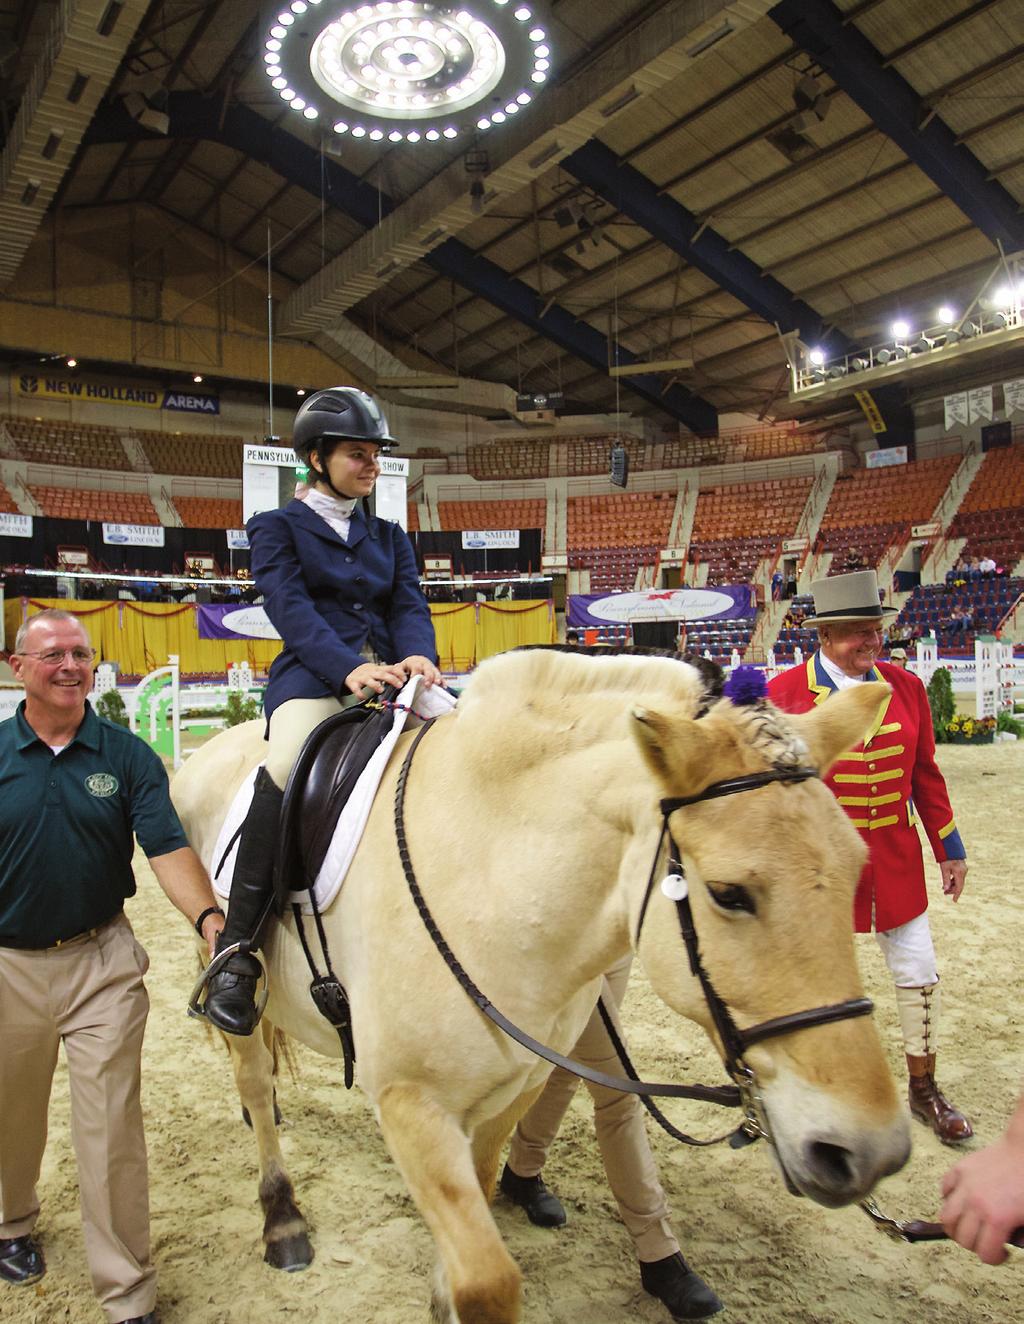 The Foundation The Pennsylvania National Horse Show supports a 501(c) 3 providing grants to therapeutic riding and horse